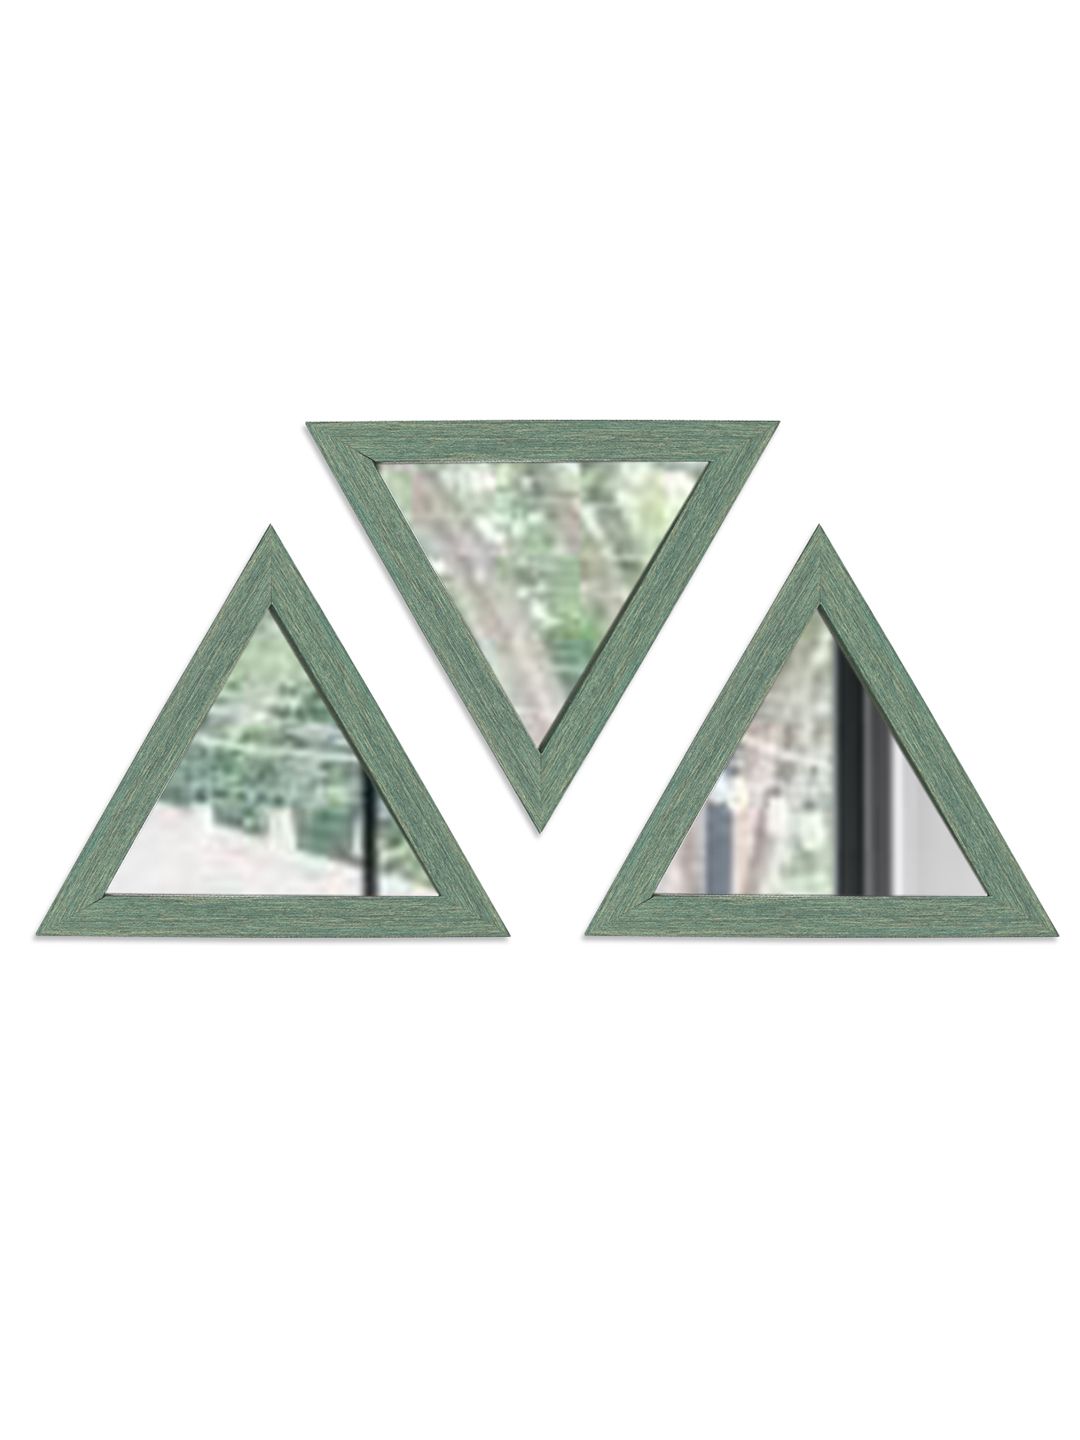 Art Street Set Of 3 Green Triangle Shaped Decorative Wall Mirrors Price in India